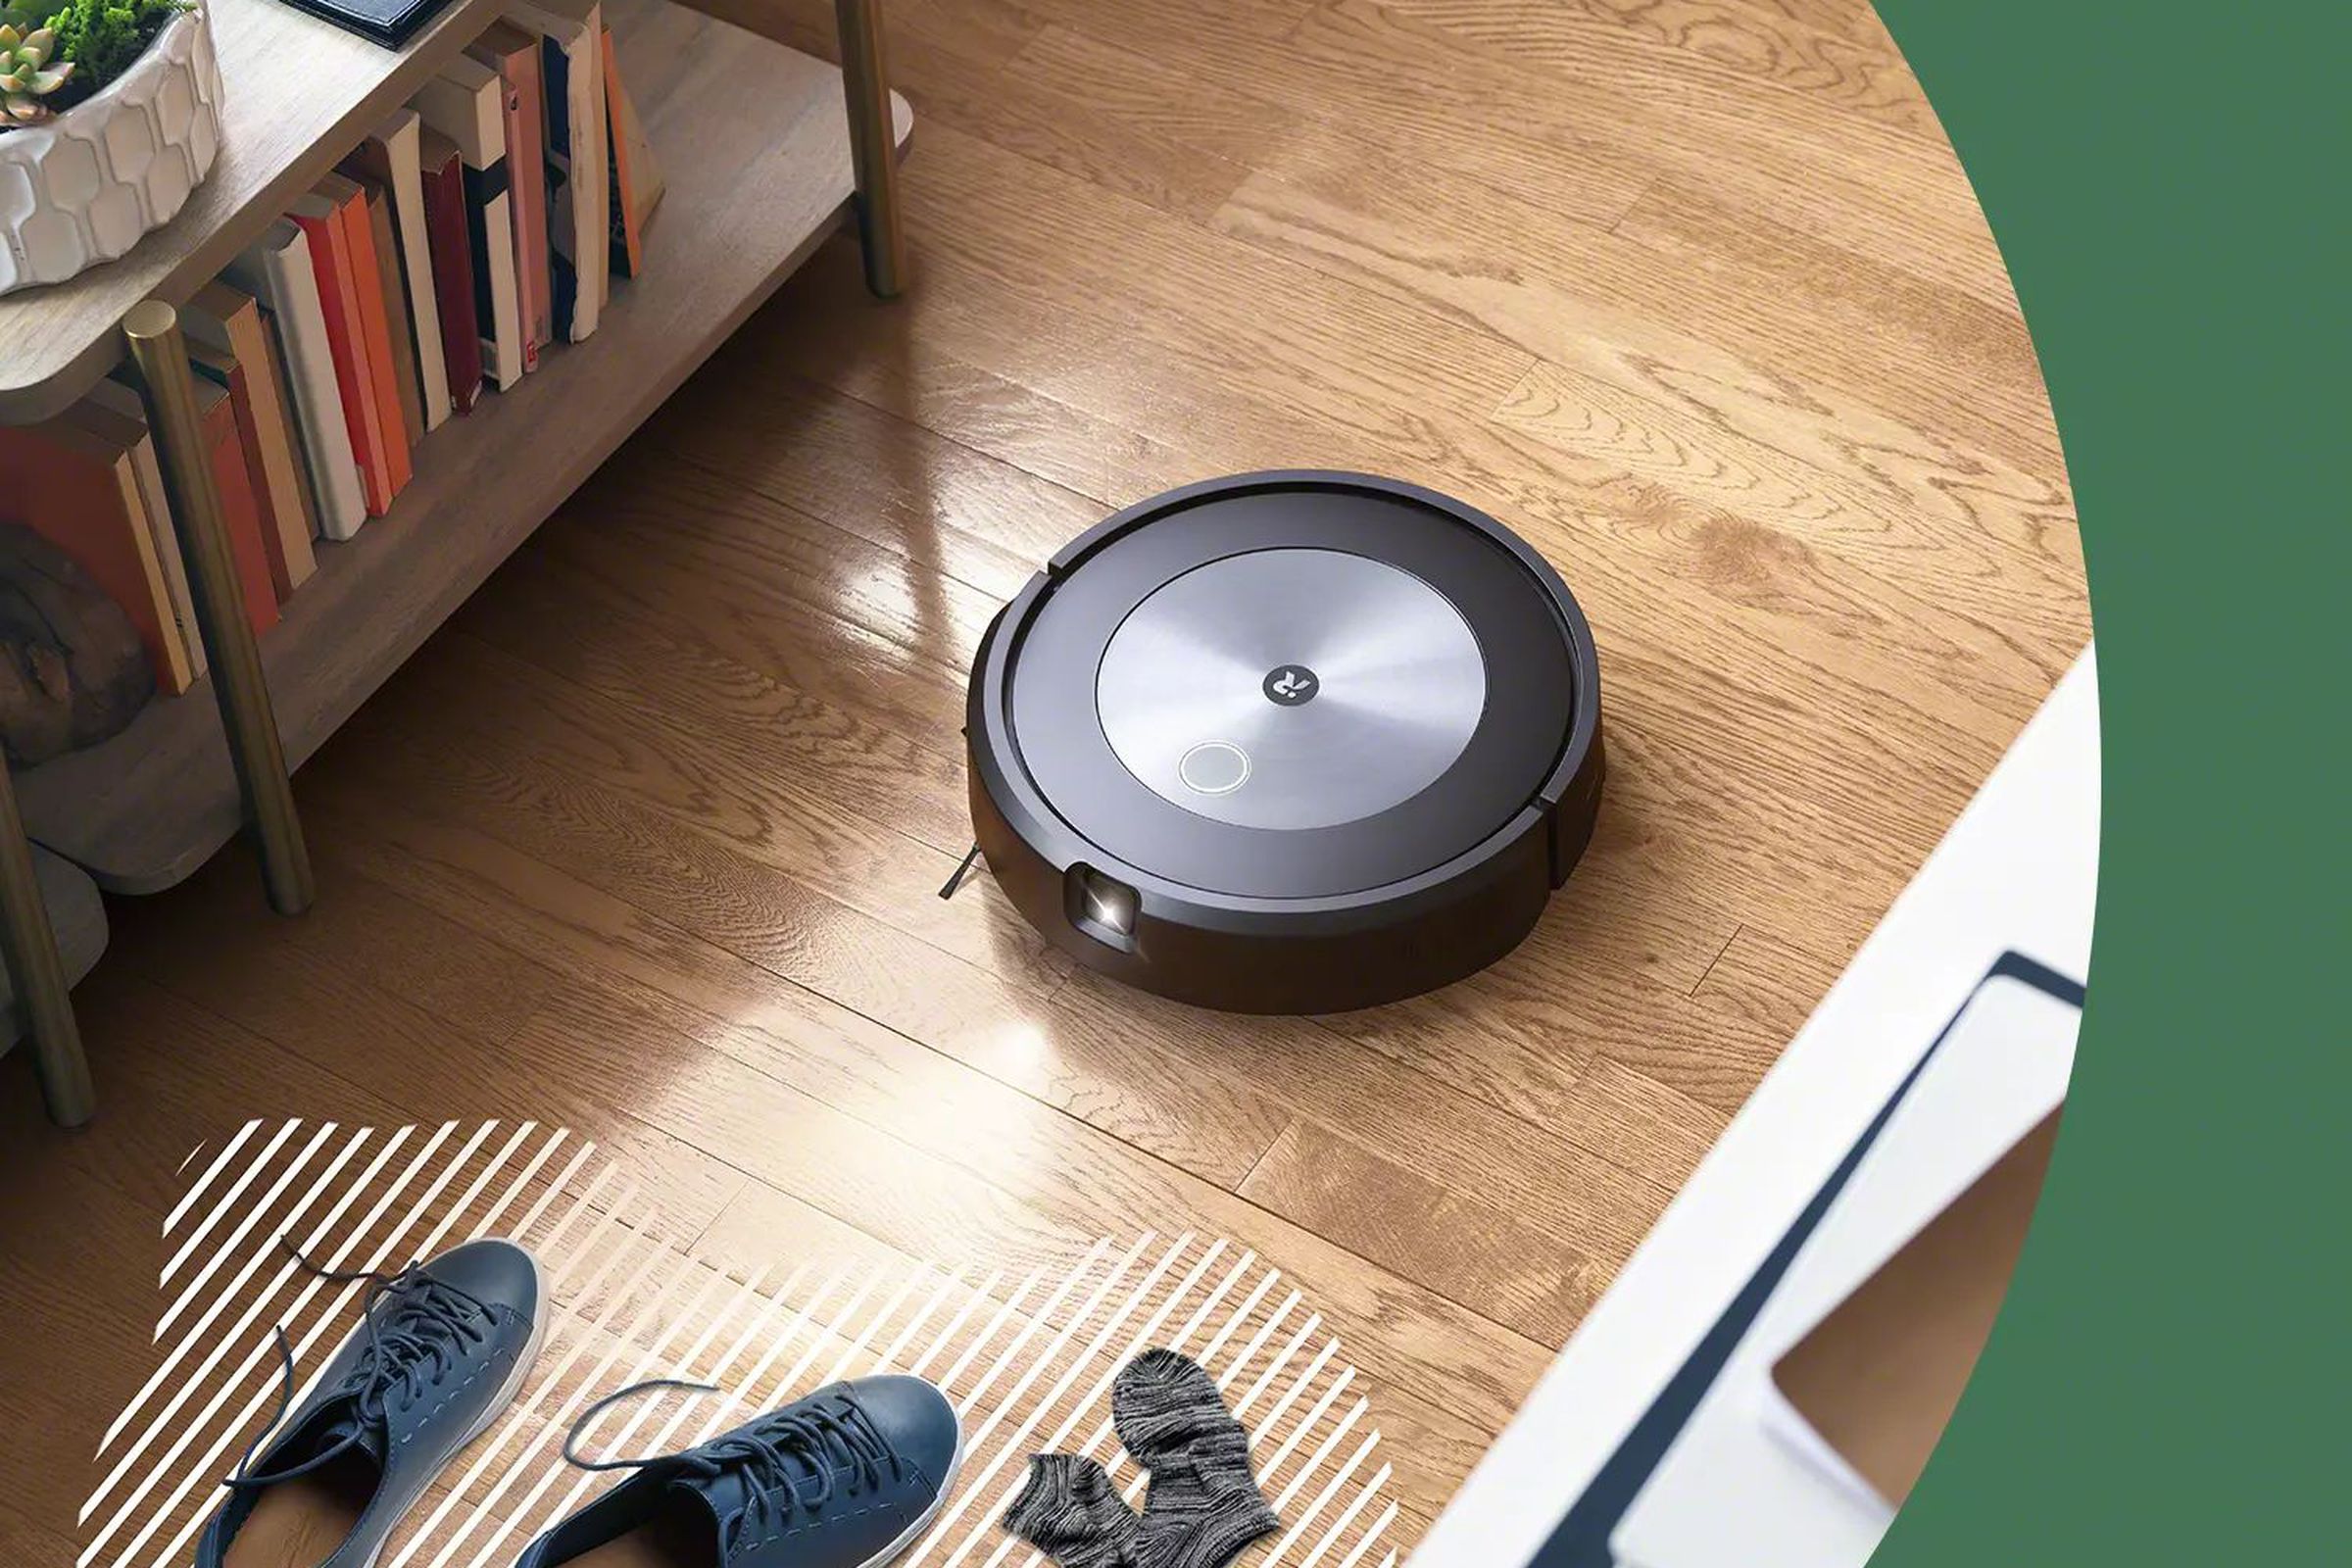 iRobot has launched a new operating system for its household robot cleaners